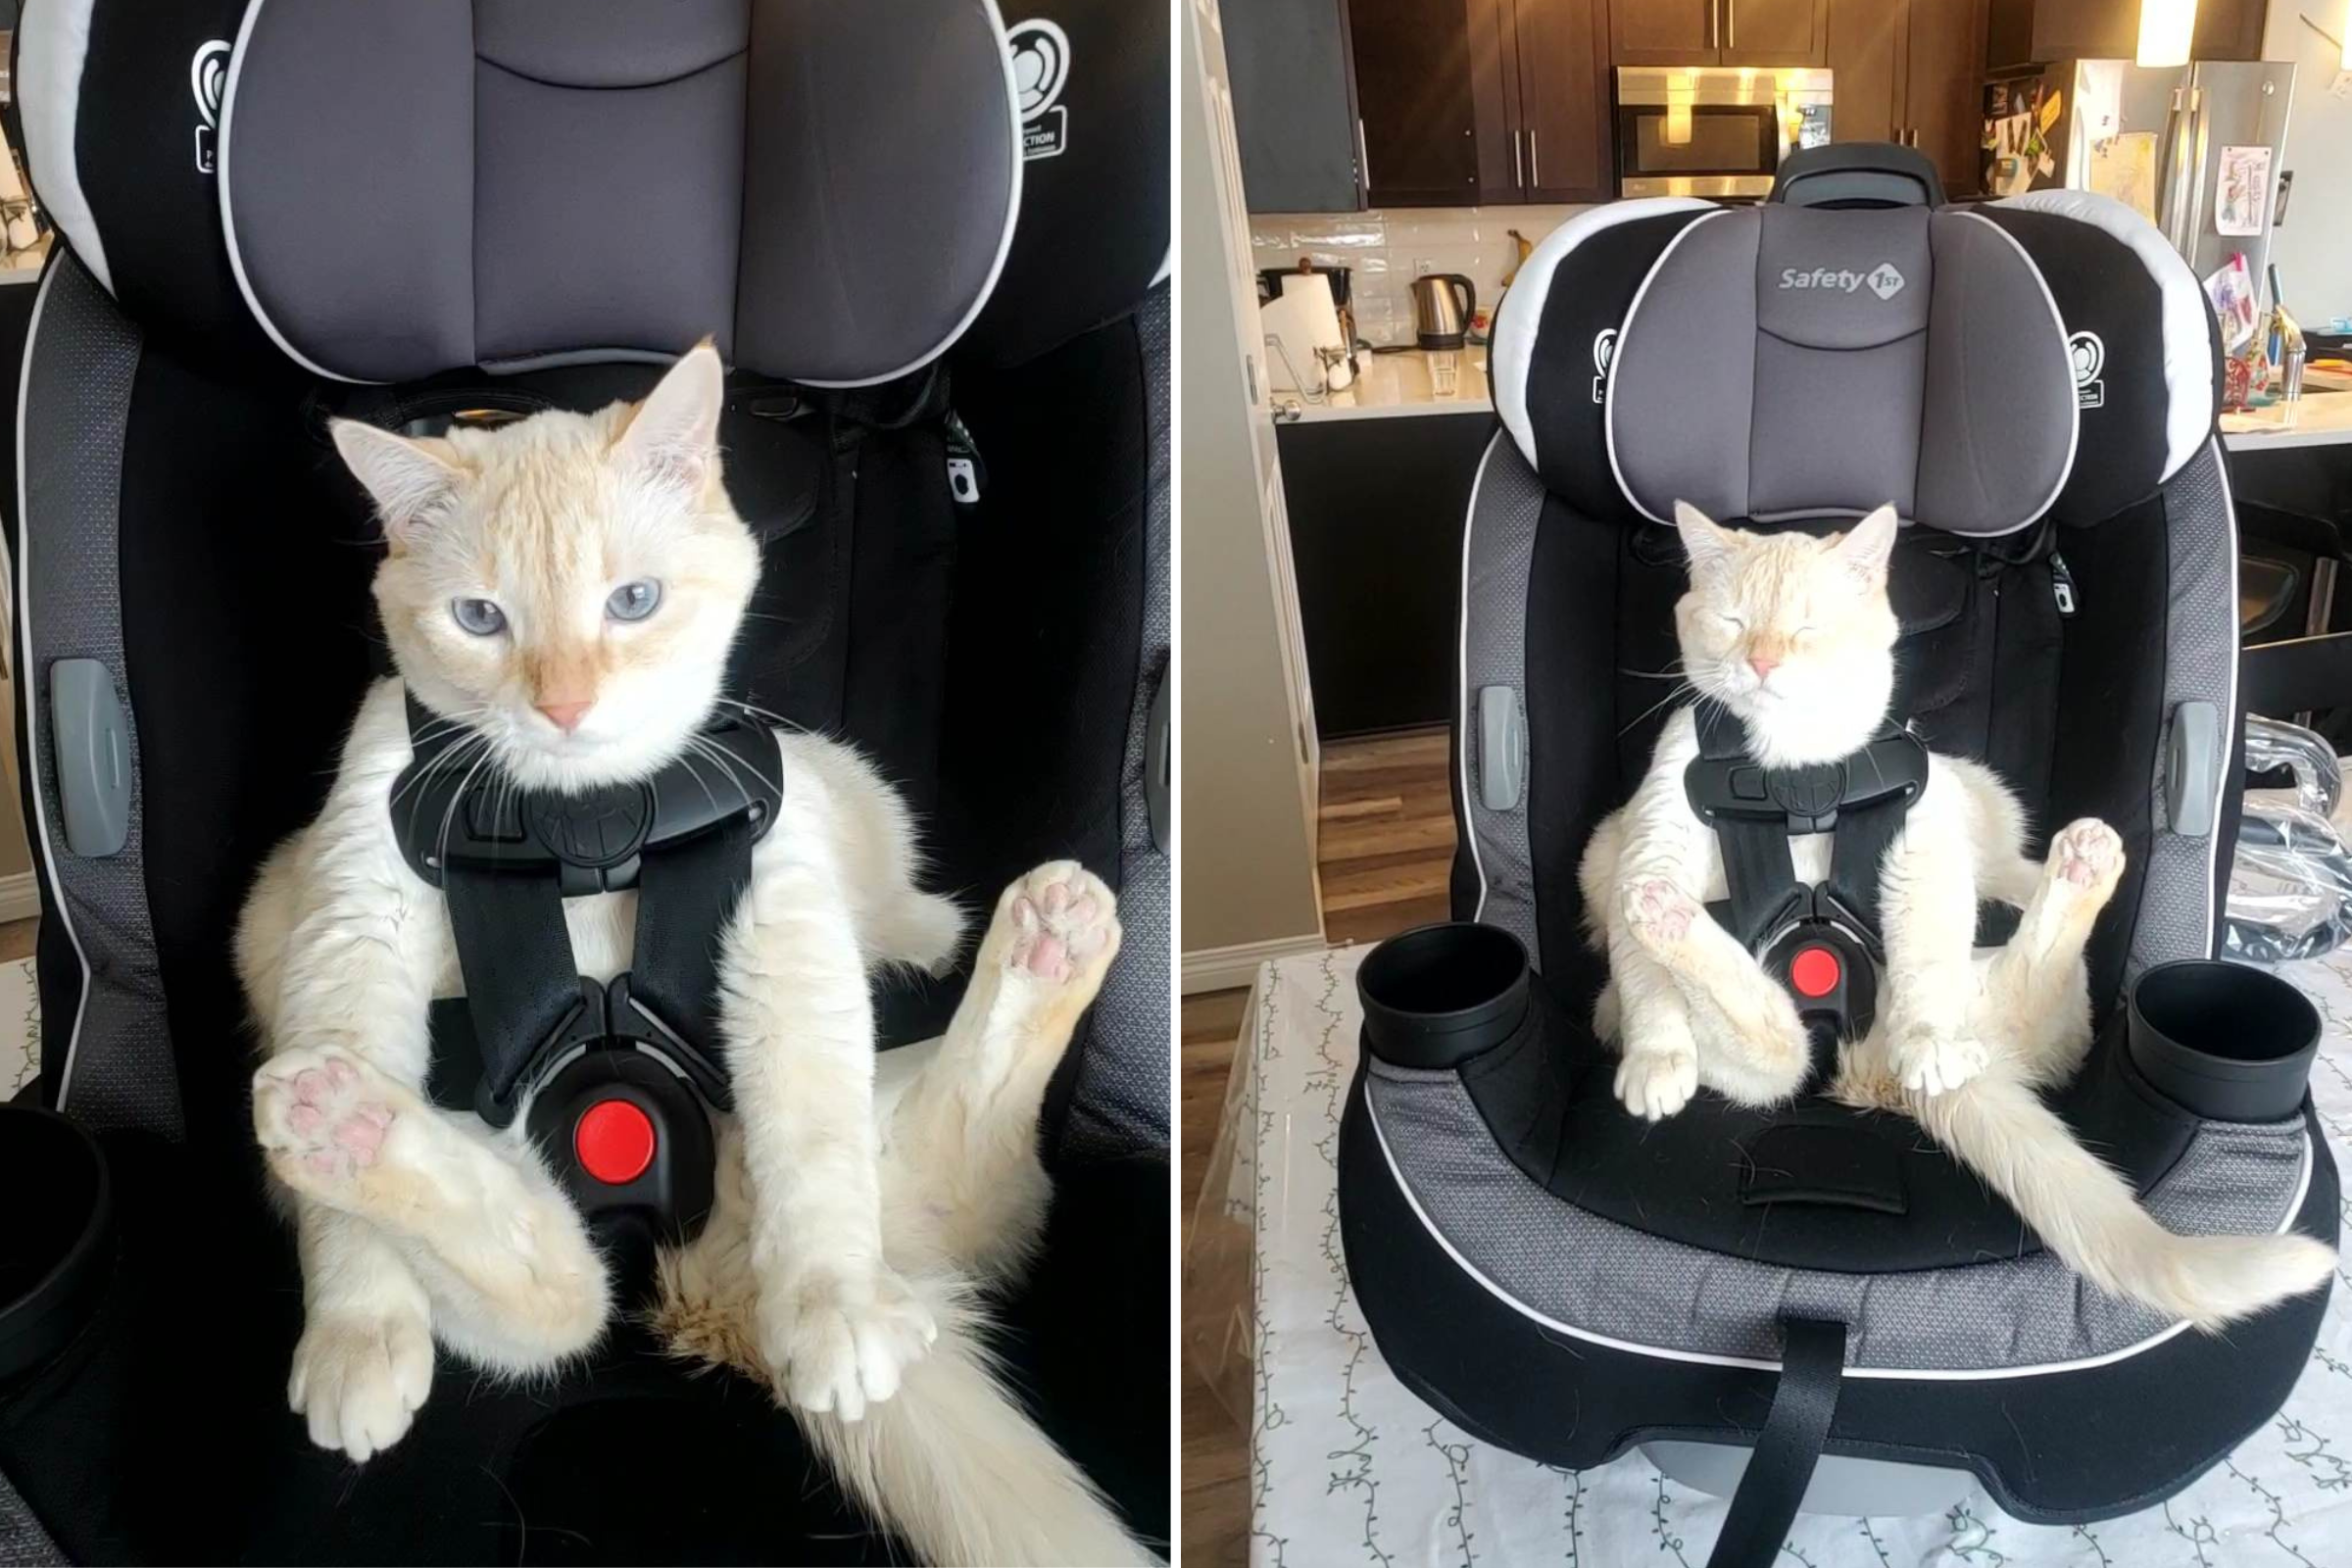 Feline Who ‘Hates the Cat Carrier’ Photographed Relaxing in Car Seat